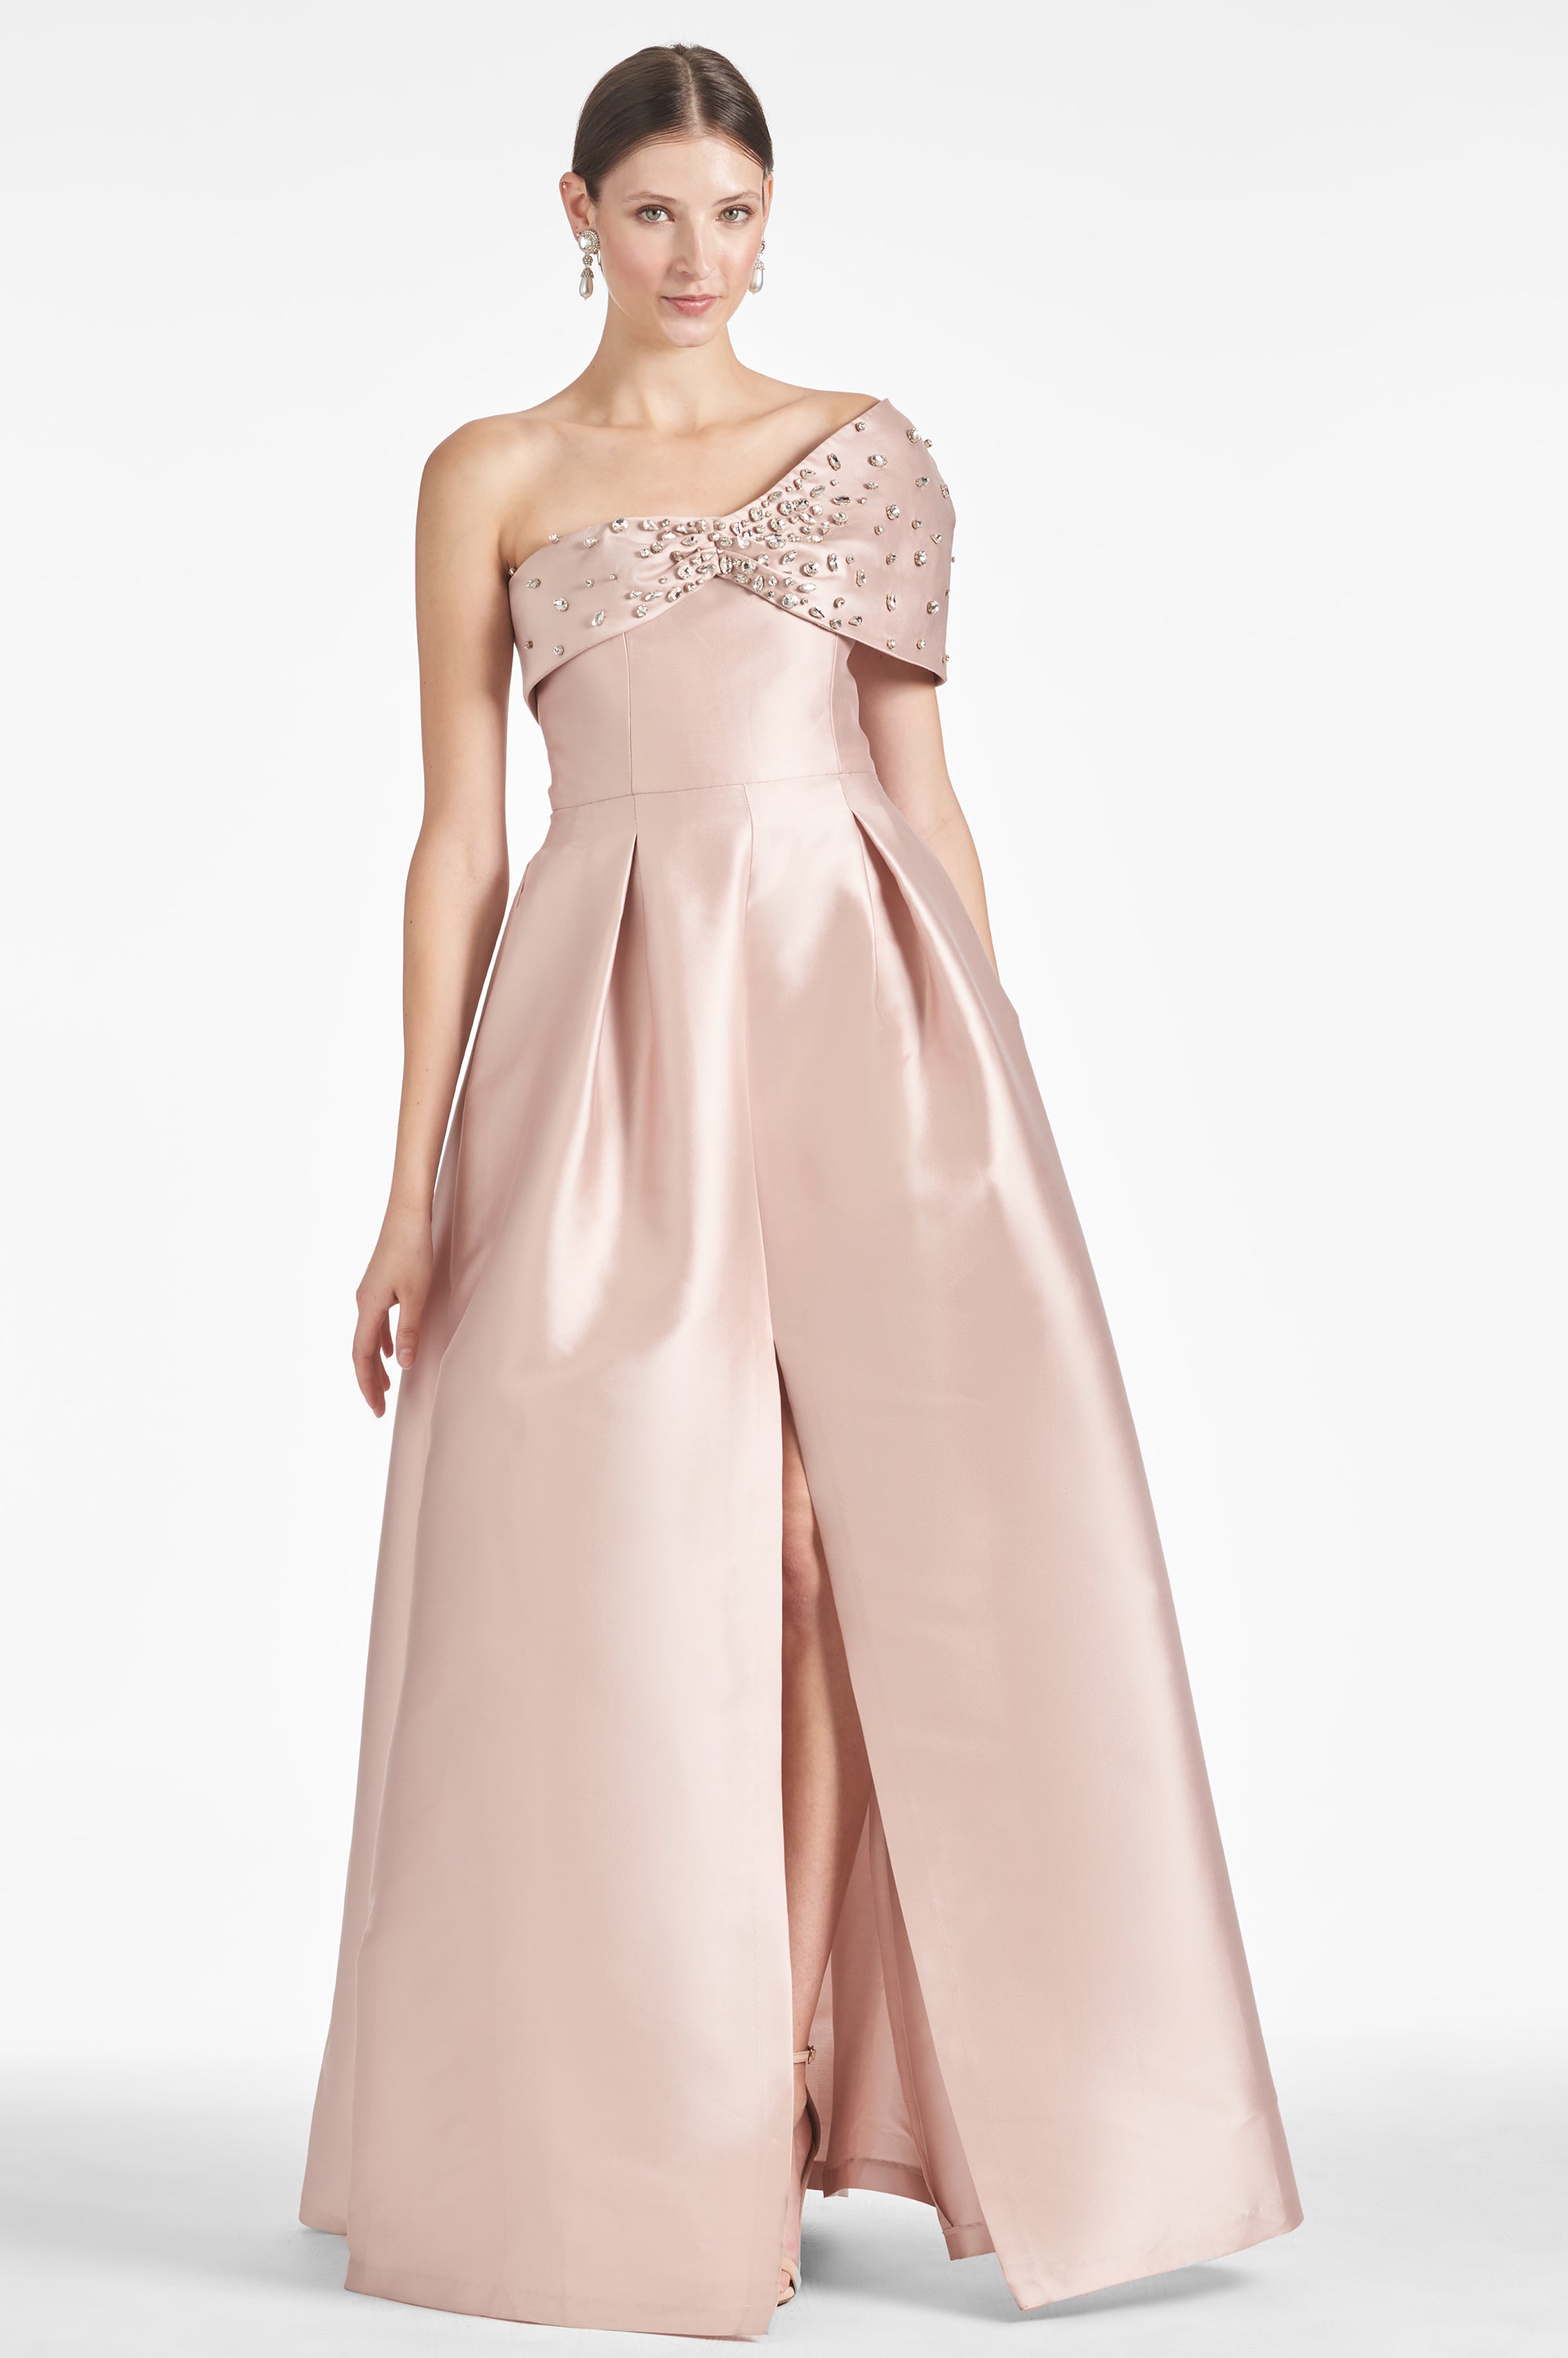 Delilah Gown - Silver Peony